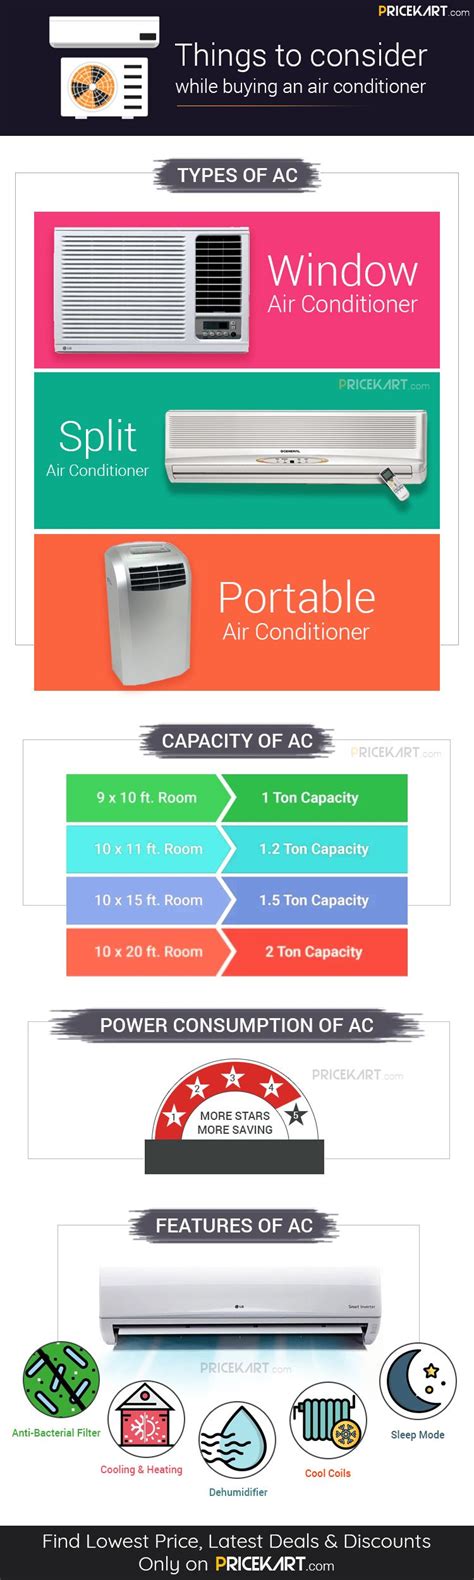 Air Conditioner Buying Guide Window Air Conditioner Buying Guide